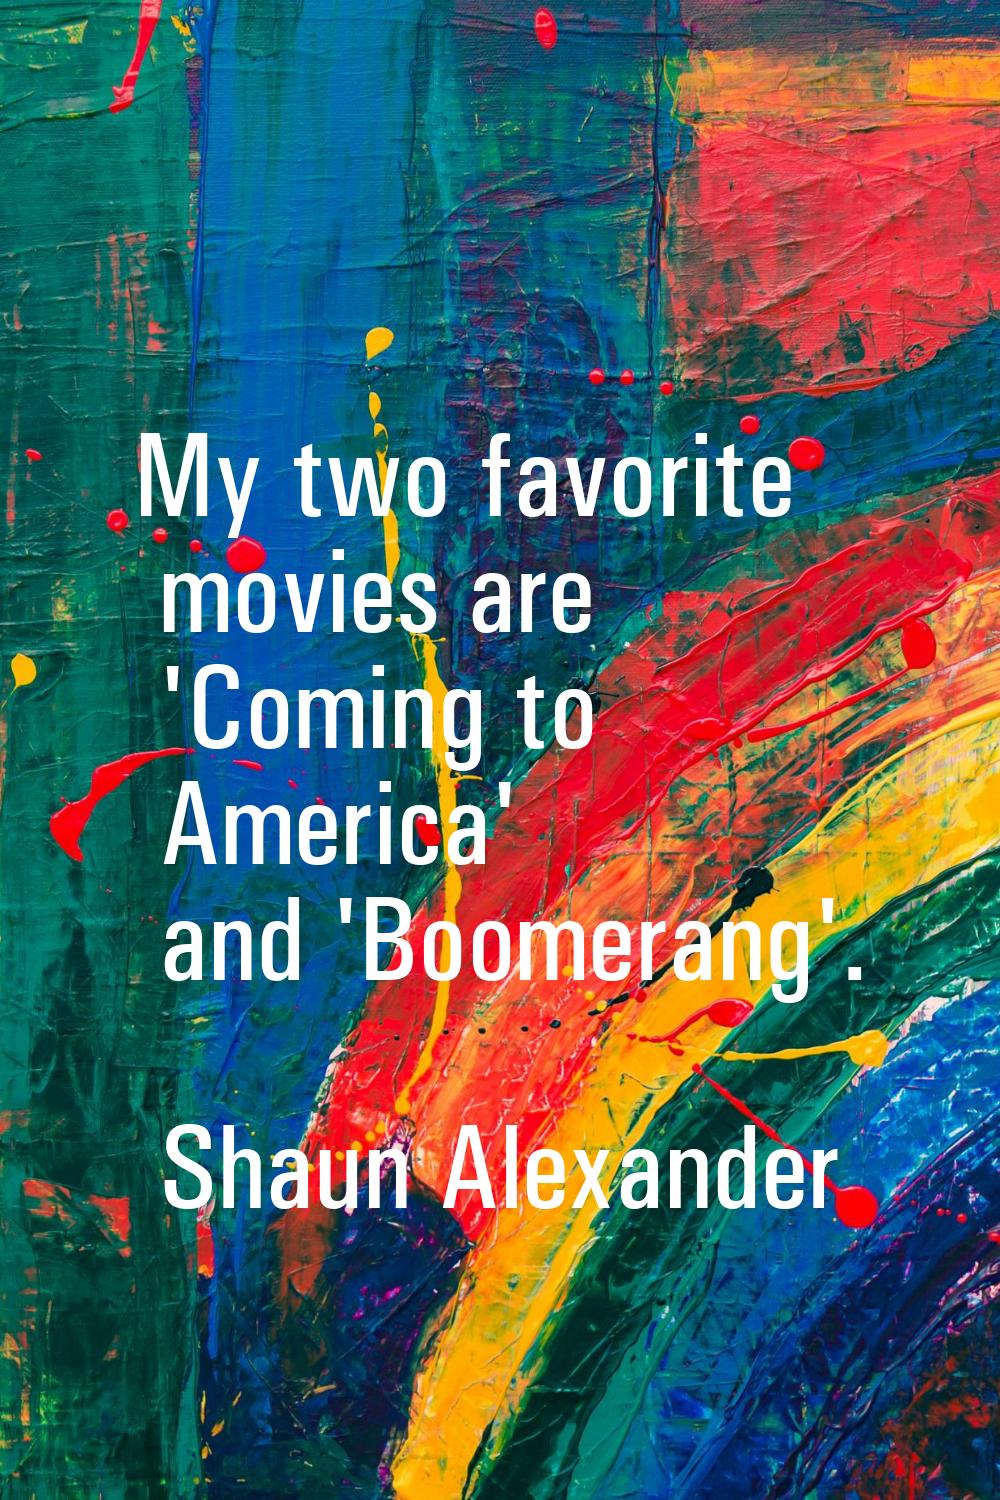 My two favorite movies are 'Coming to America' and 'Boomerang'.